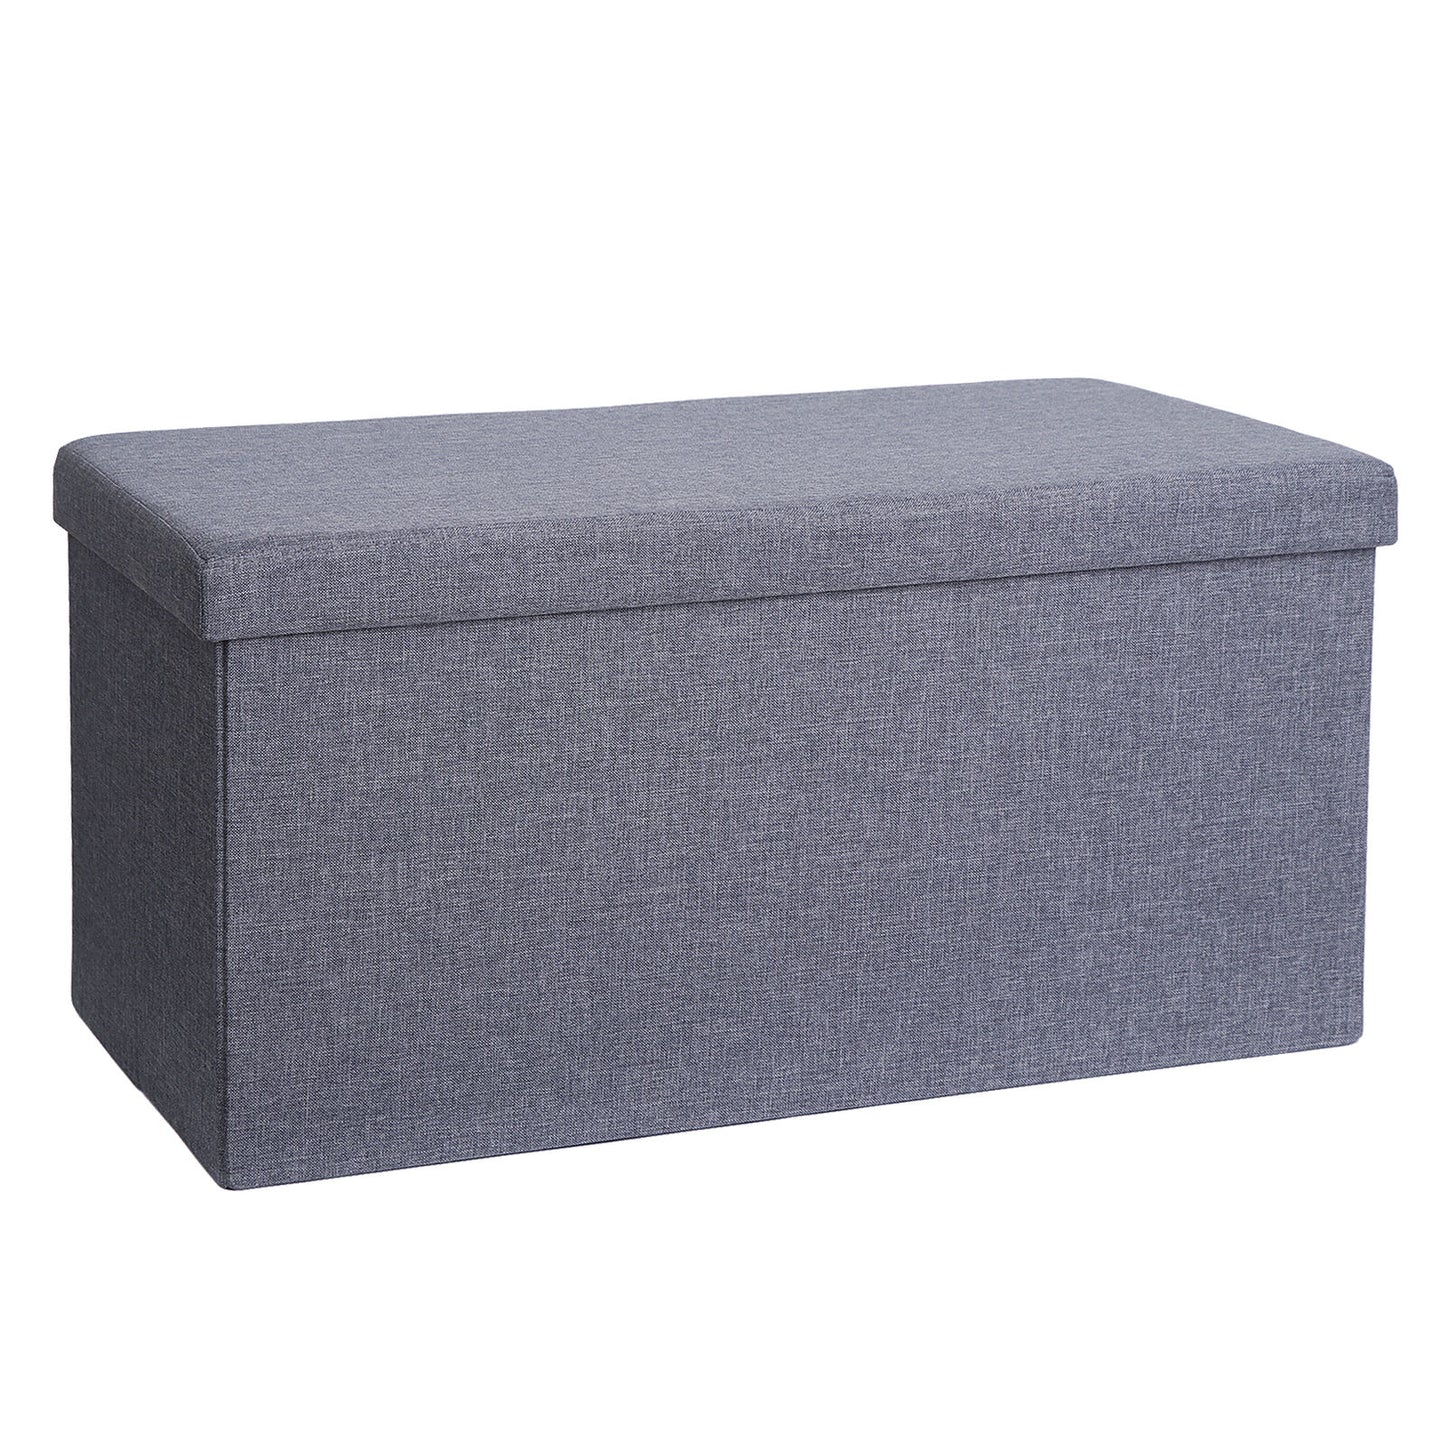 30 Inches Folding Storage Ottoman Bench Storage Chest Foot Rest Stool Bedroom